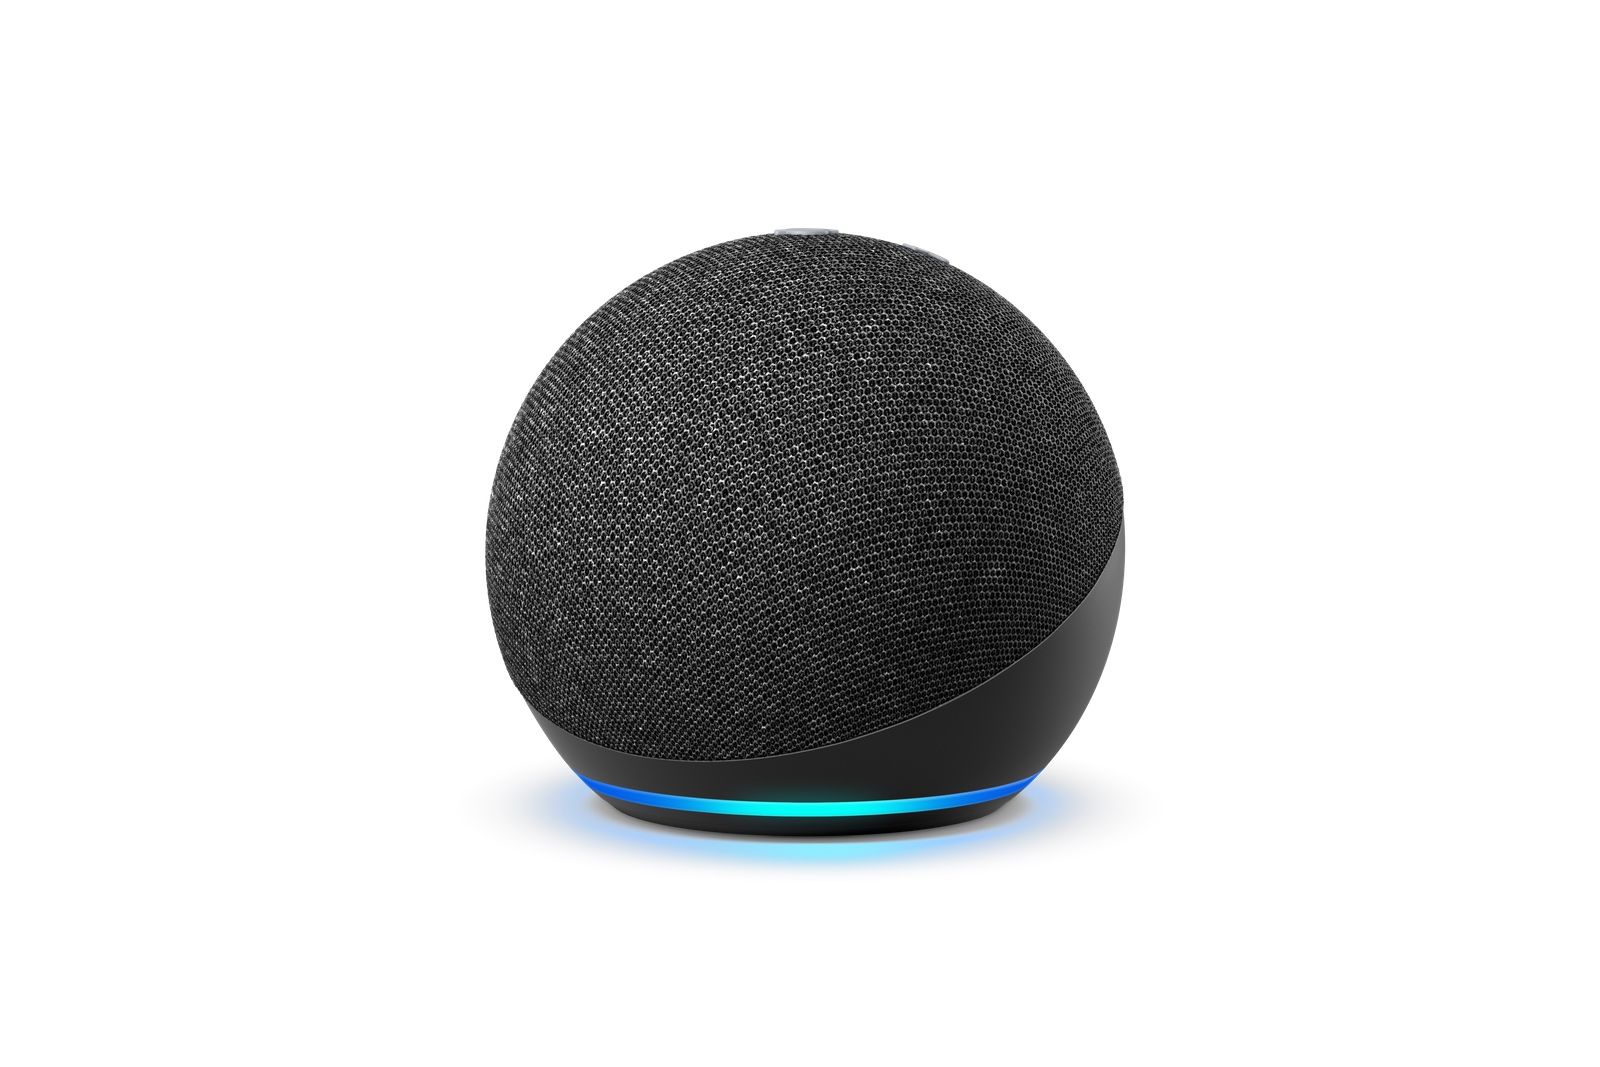 https://static0.pocketlintimages.com/wordpress/wp-content/uploads/153958-speakers-news-amazon-brings-new-design-and-chip-to-the-echo-dot-and-dot-with-clock-image1-fyrqjxih5a.jpg